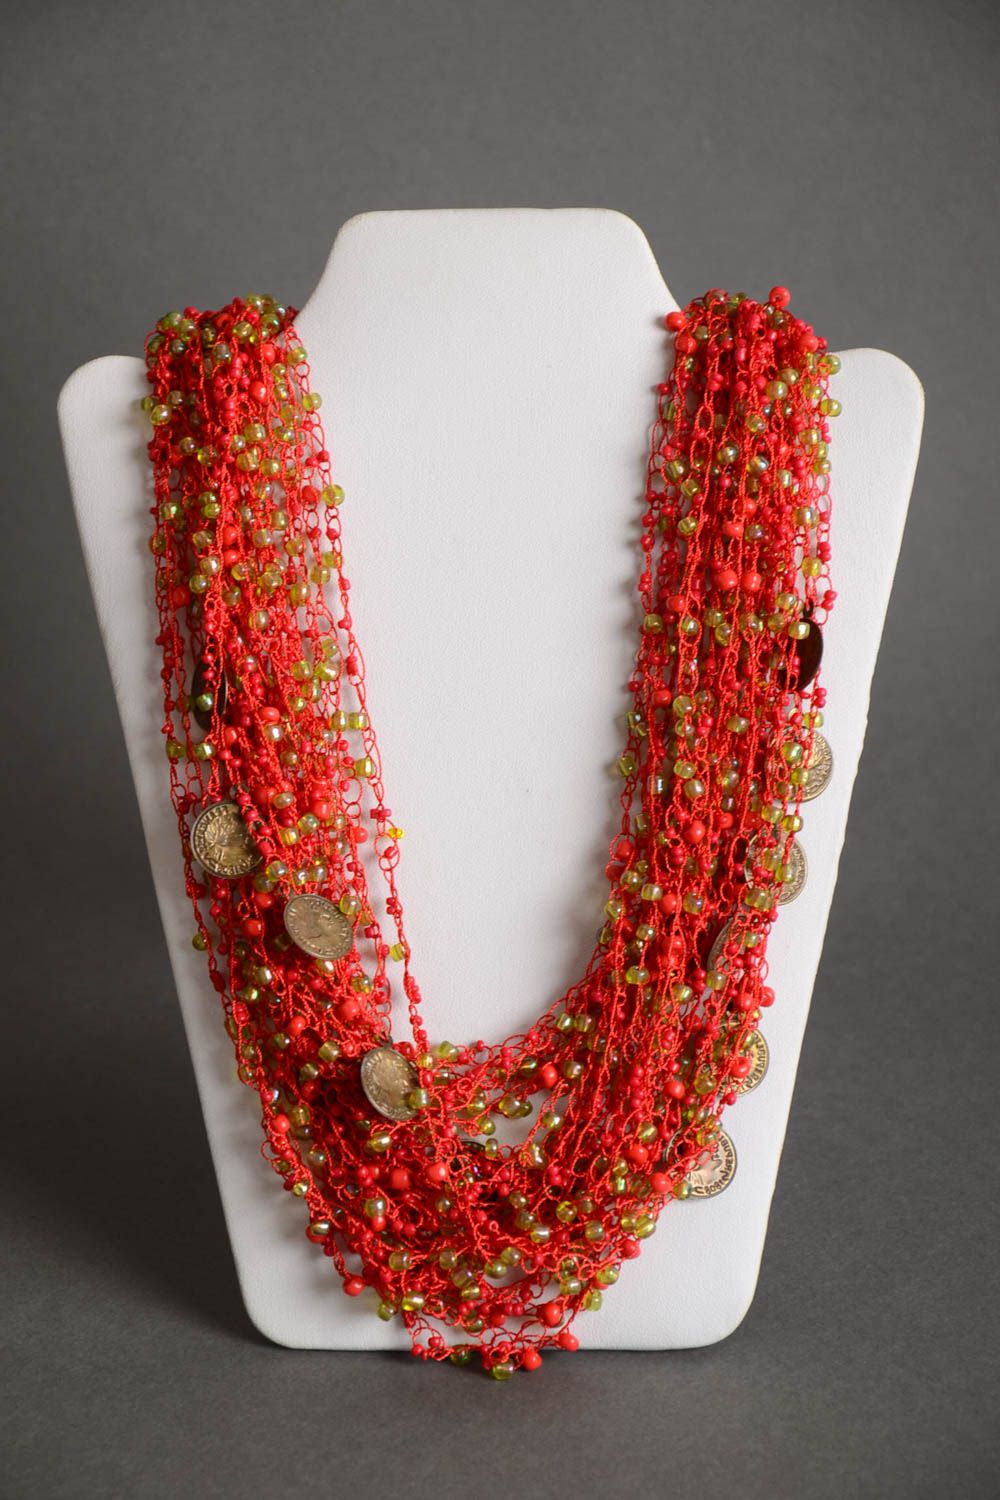 Handmade bright airy crocheted beaded necklace of coral color with coins photo 2